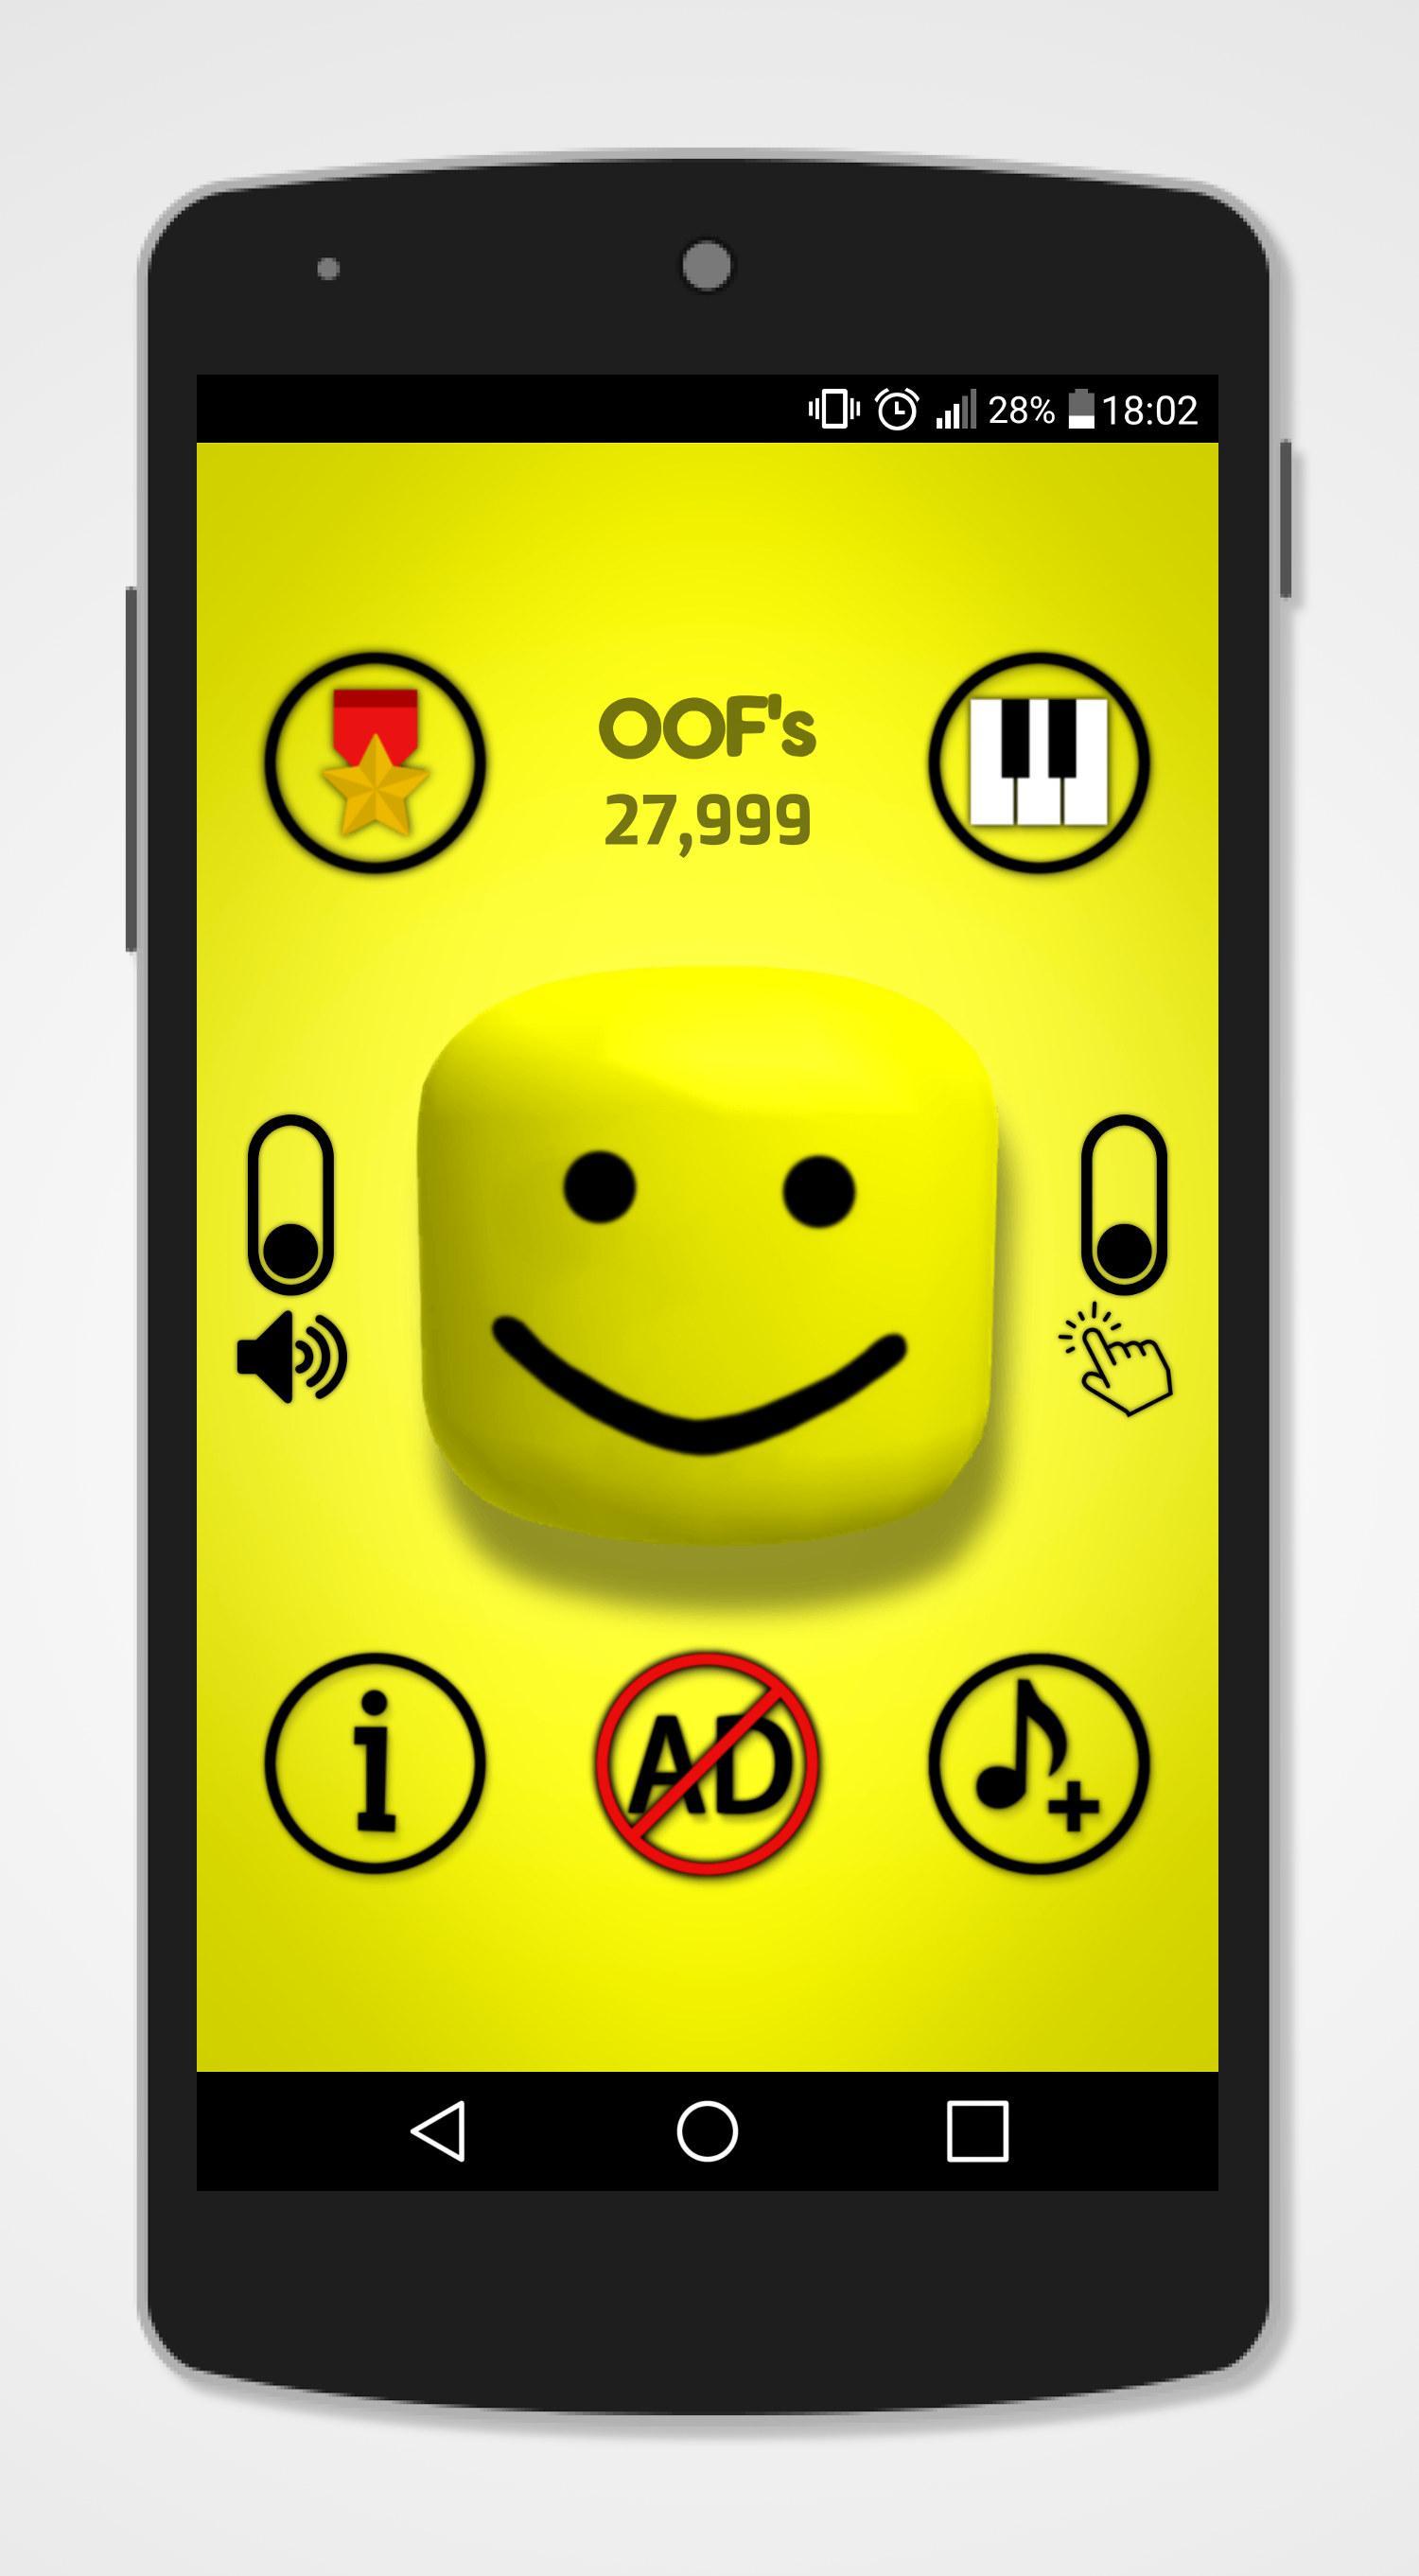 Oof For Android Apk Download - off roblox death sound 2019